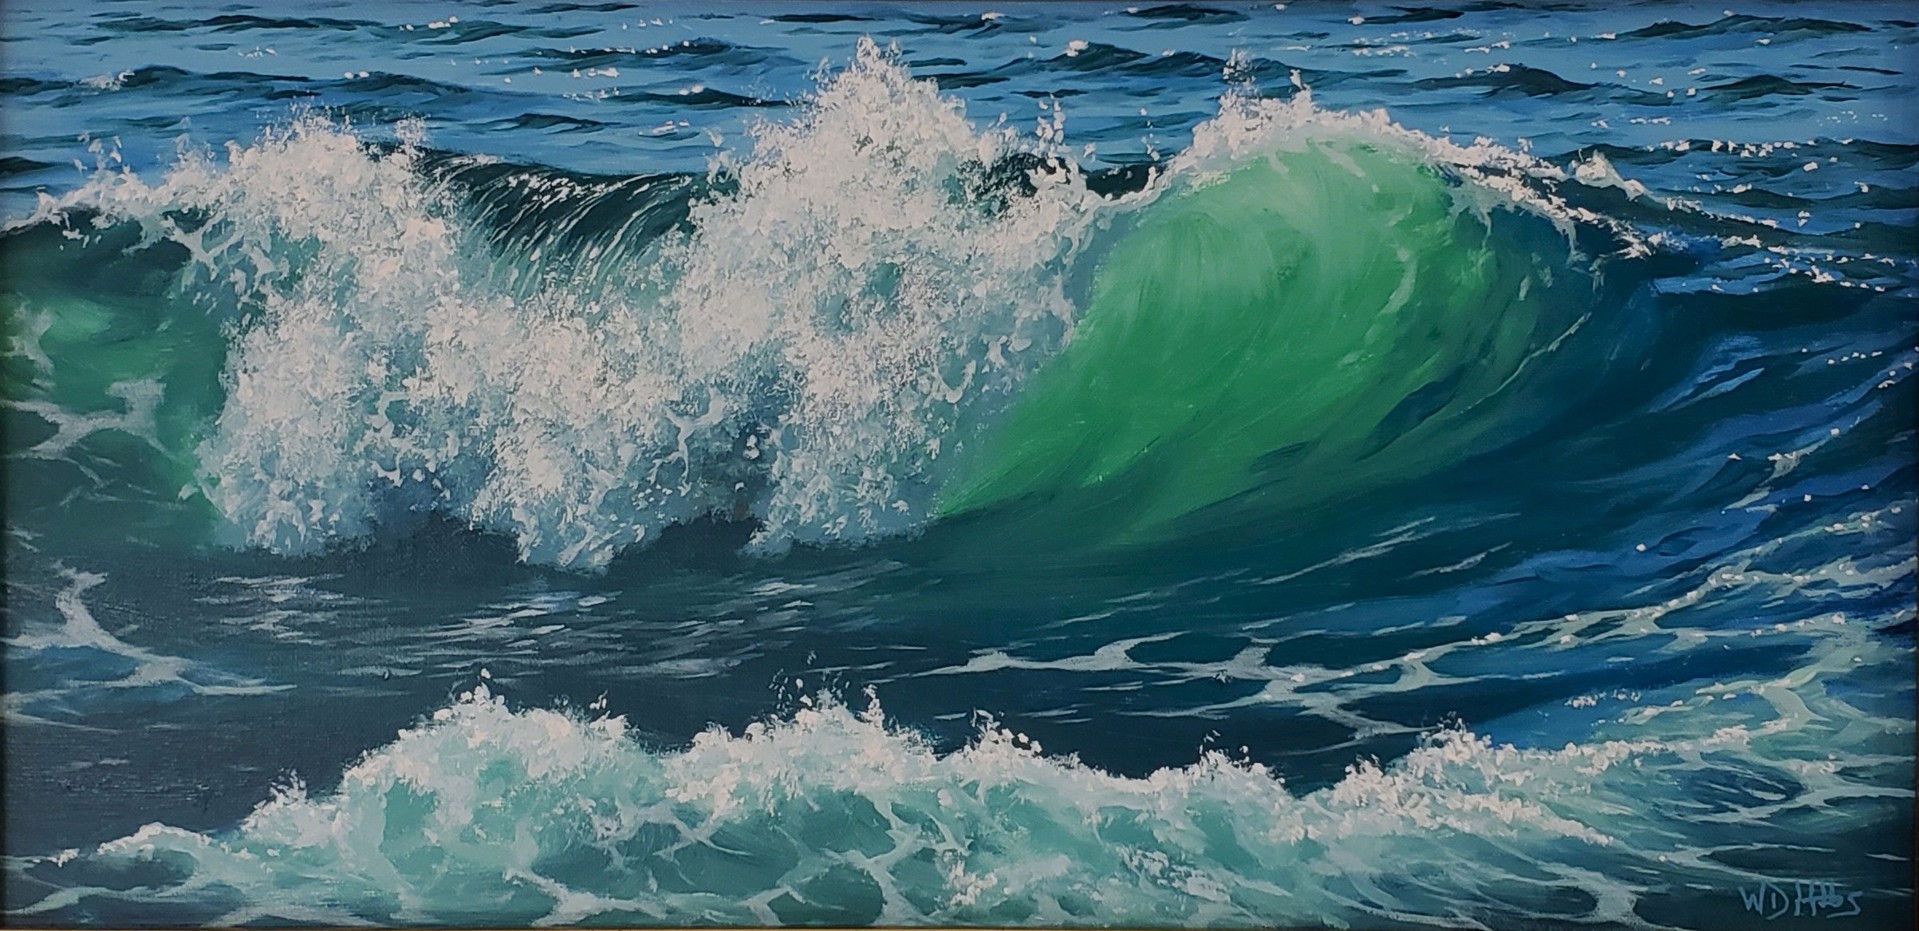 Study of Surf in Motion by William D. Hobbs